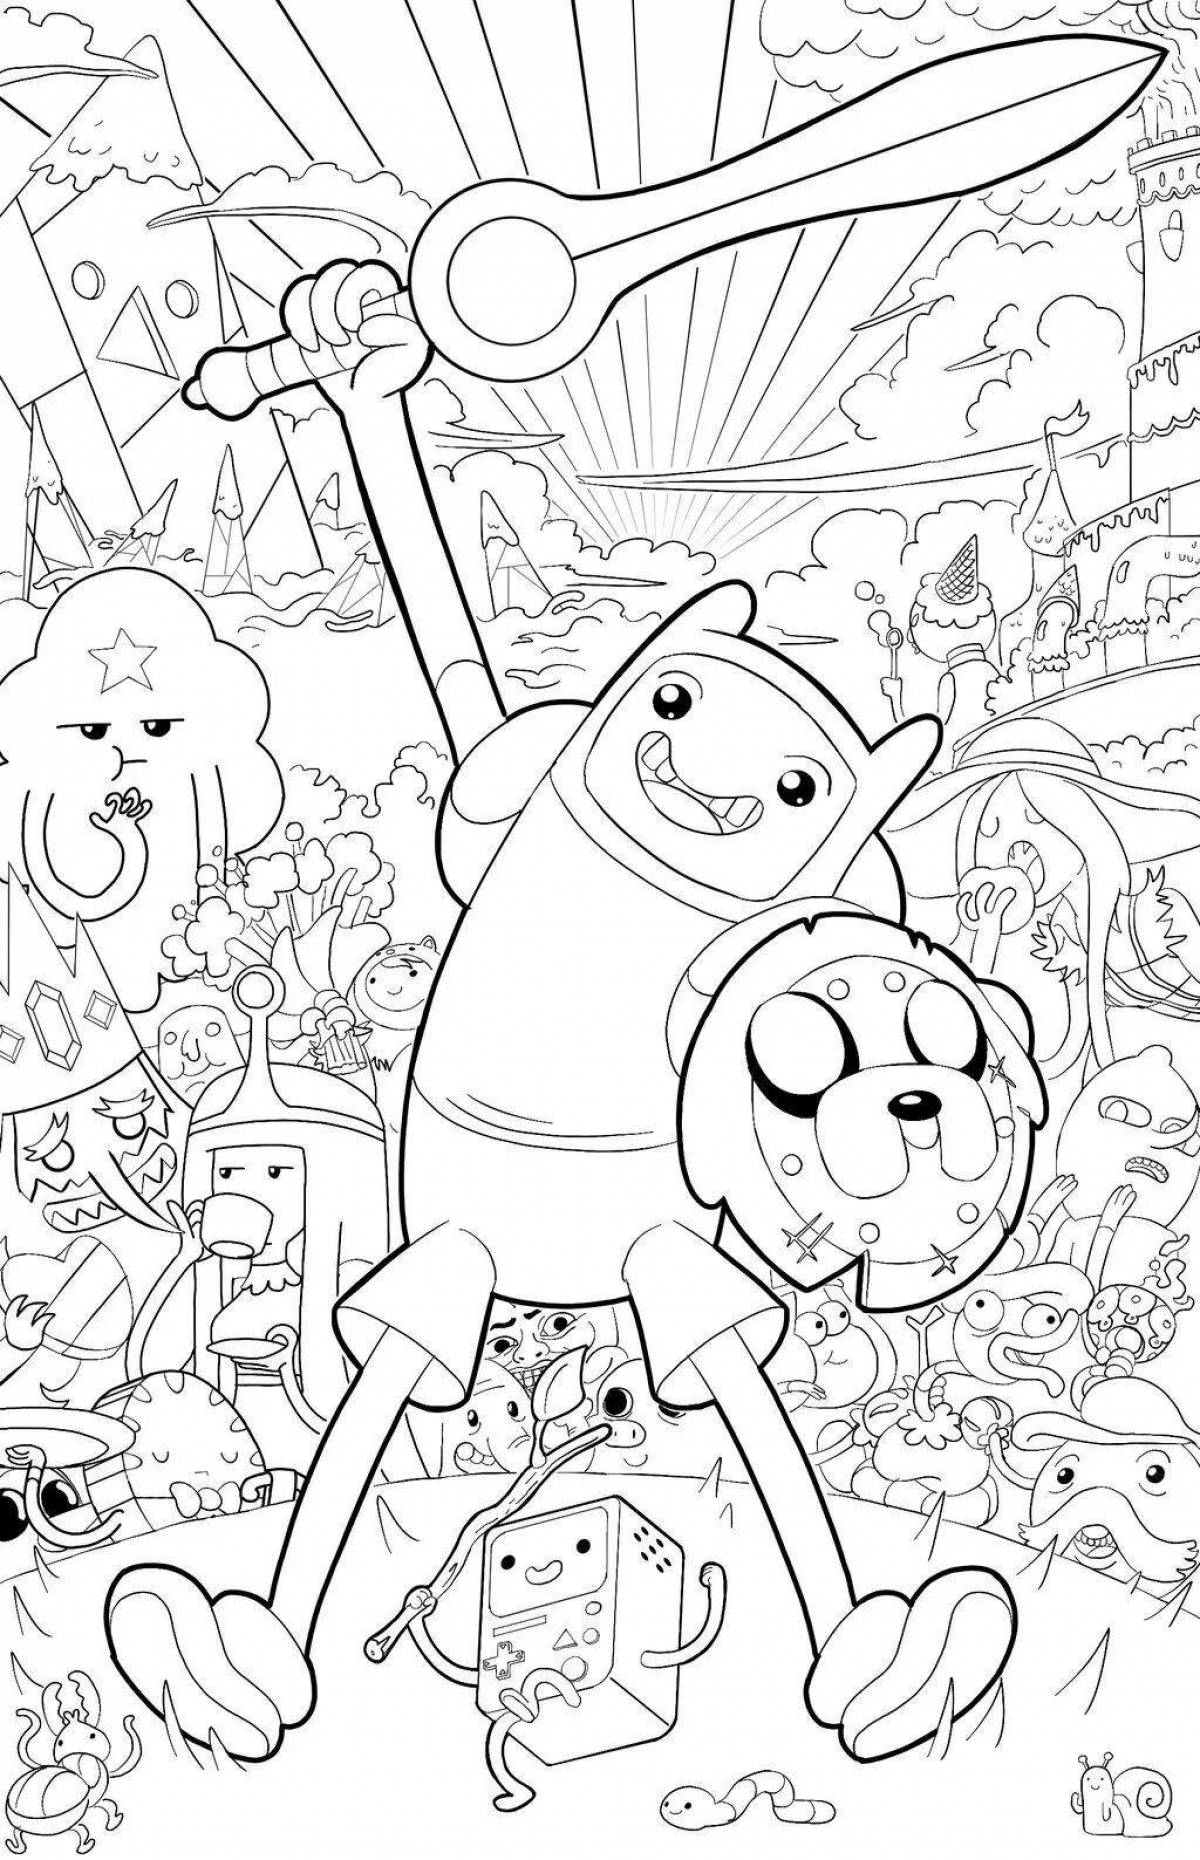 Fin and Jake from The Great Adventure Time